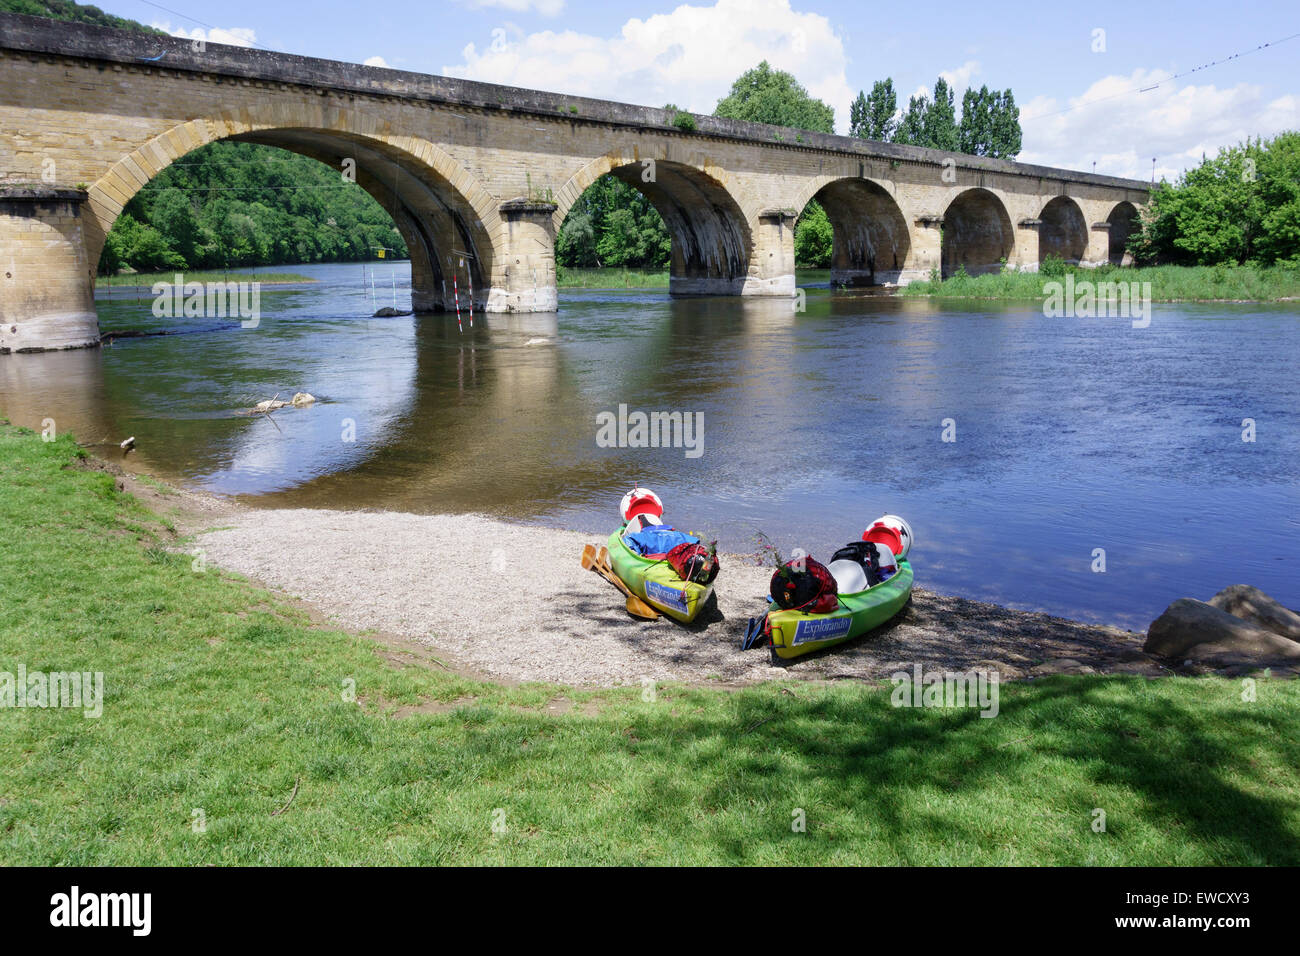 Two kayaks loaded with camping equipment on the bank of the River Dordogne, near the bridge at Castelnaud la Chapelle, France Stock Photo